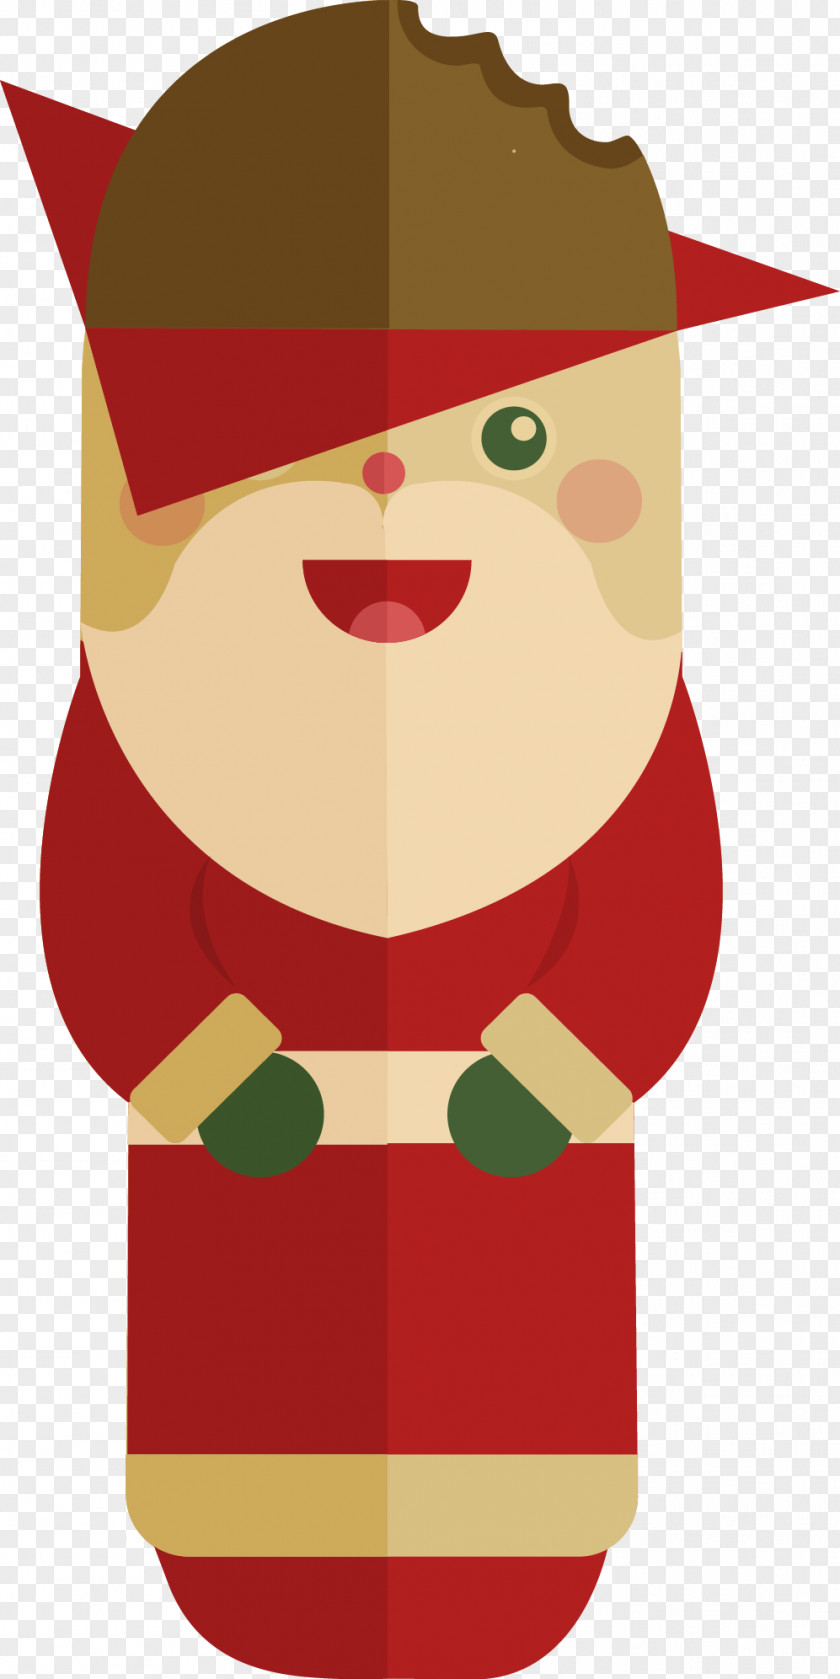 Red Santa Claus Clause Christmas PNG